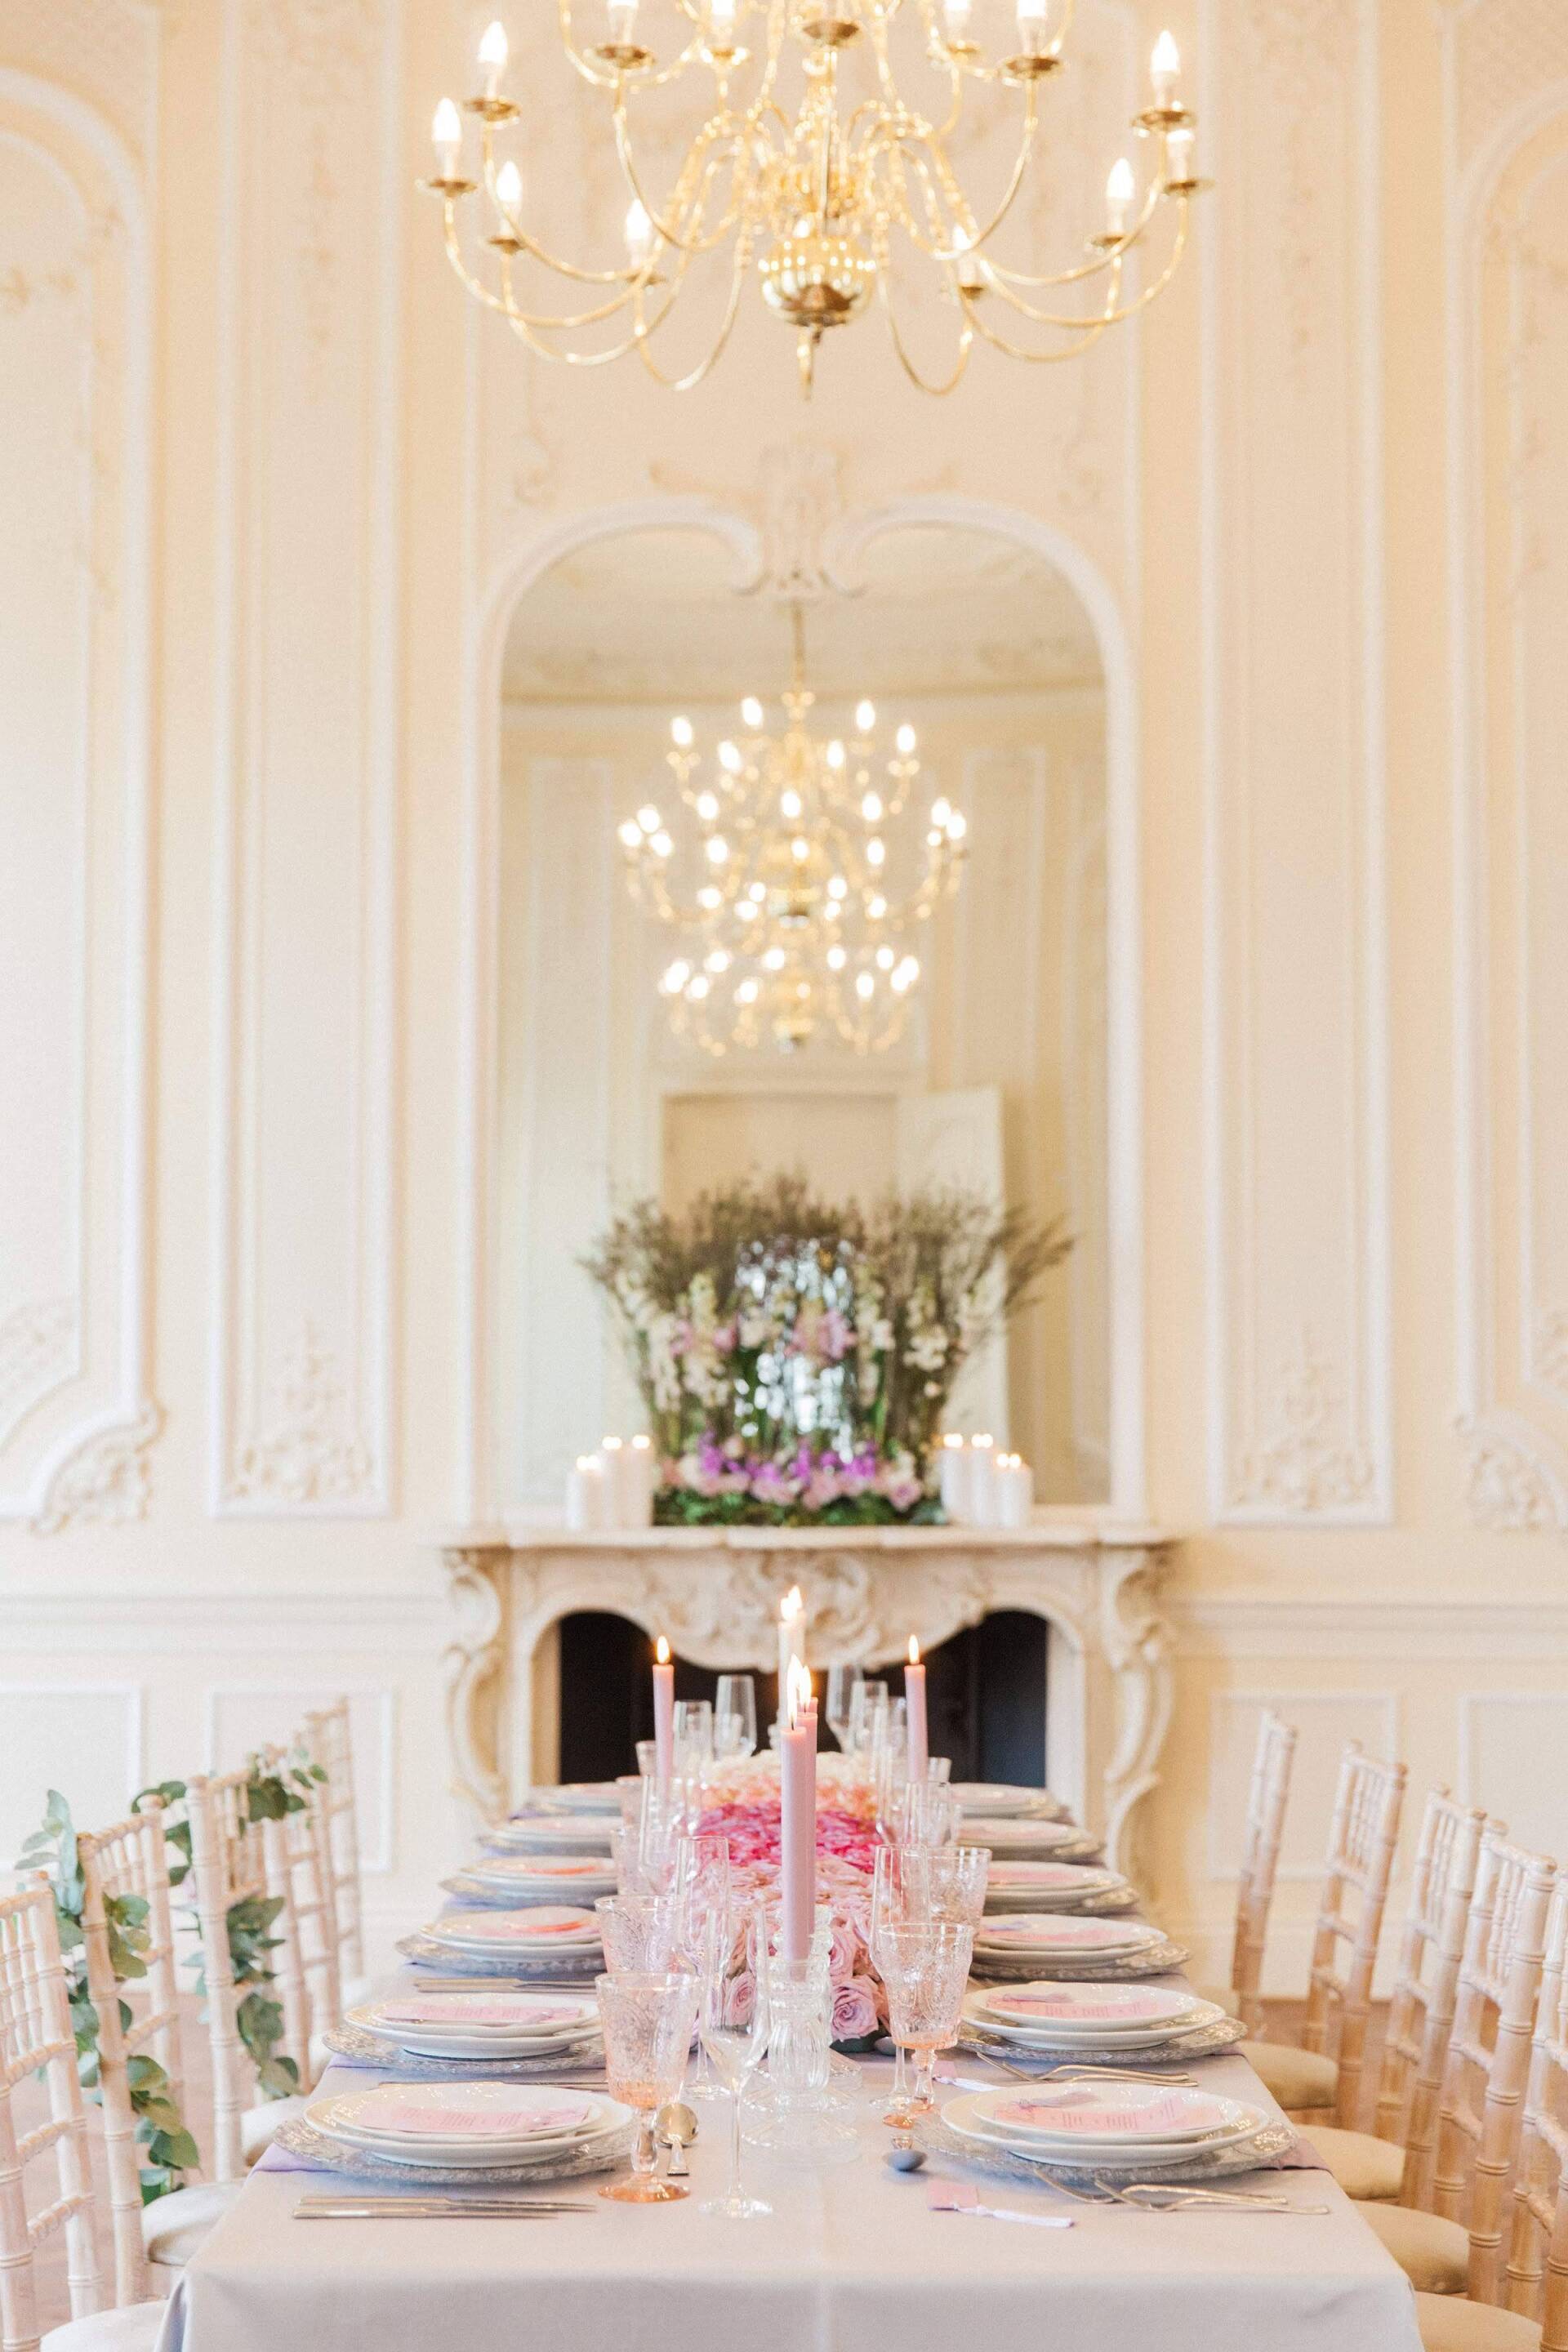 Wedding table set up with pink purple roses, cream chairs in a cream room with georgian walls